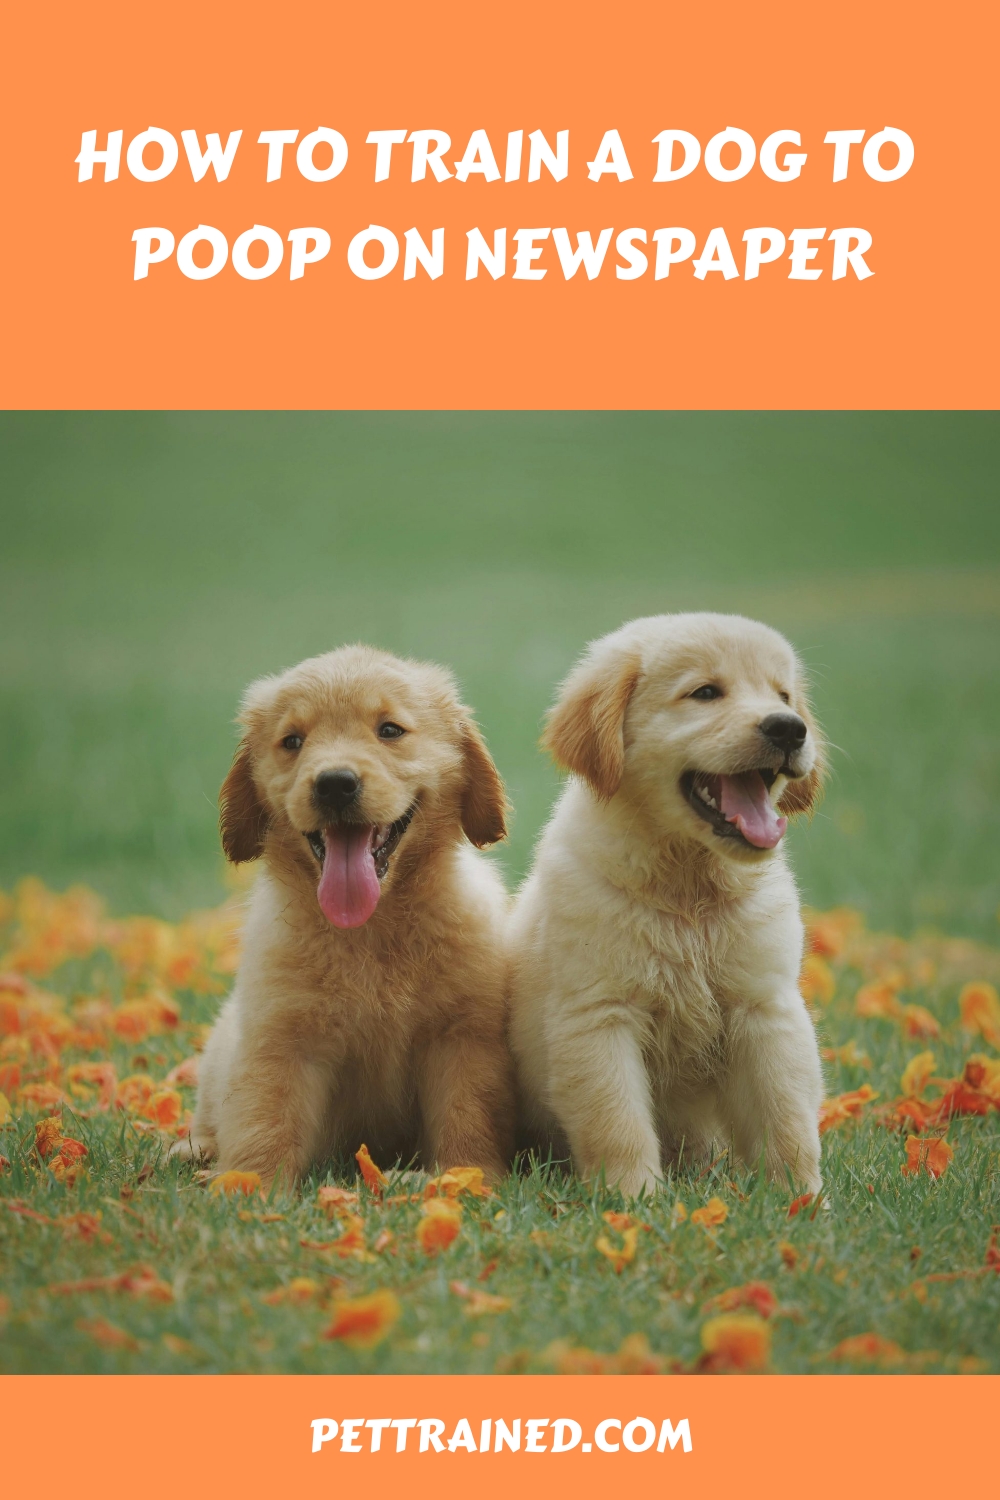 How to Train A Dog to Poop on Newspaper